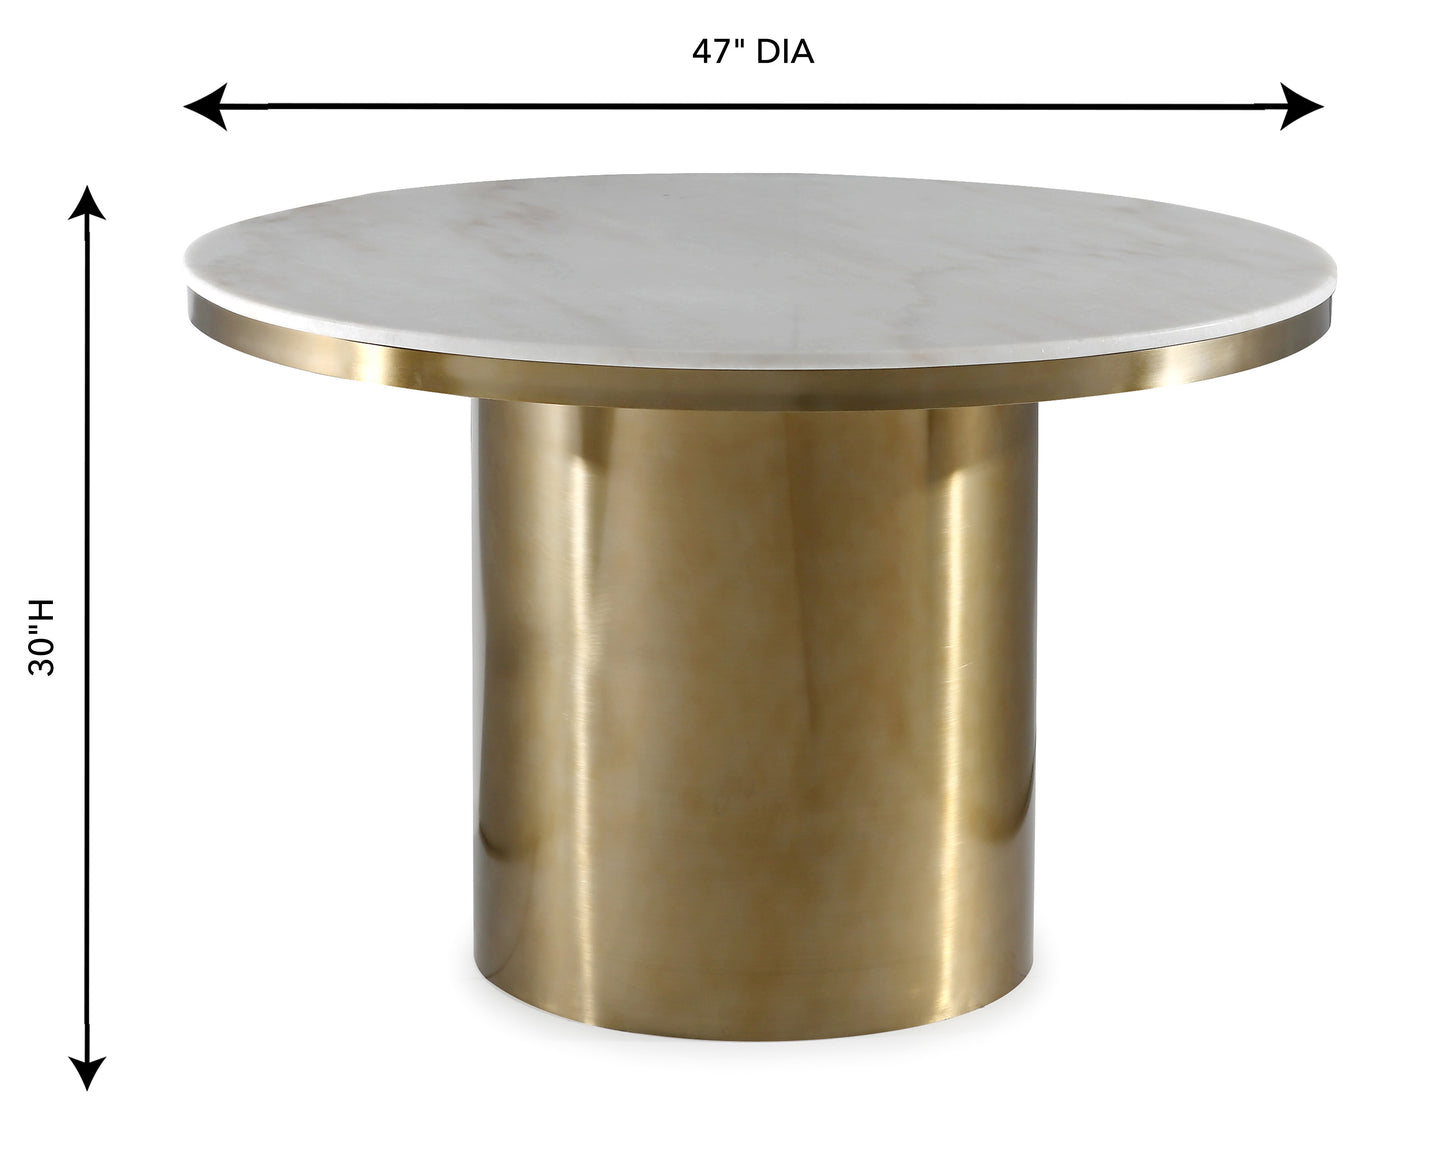 Alden Marble Dining Table - living-essentials